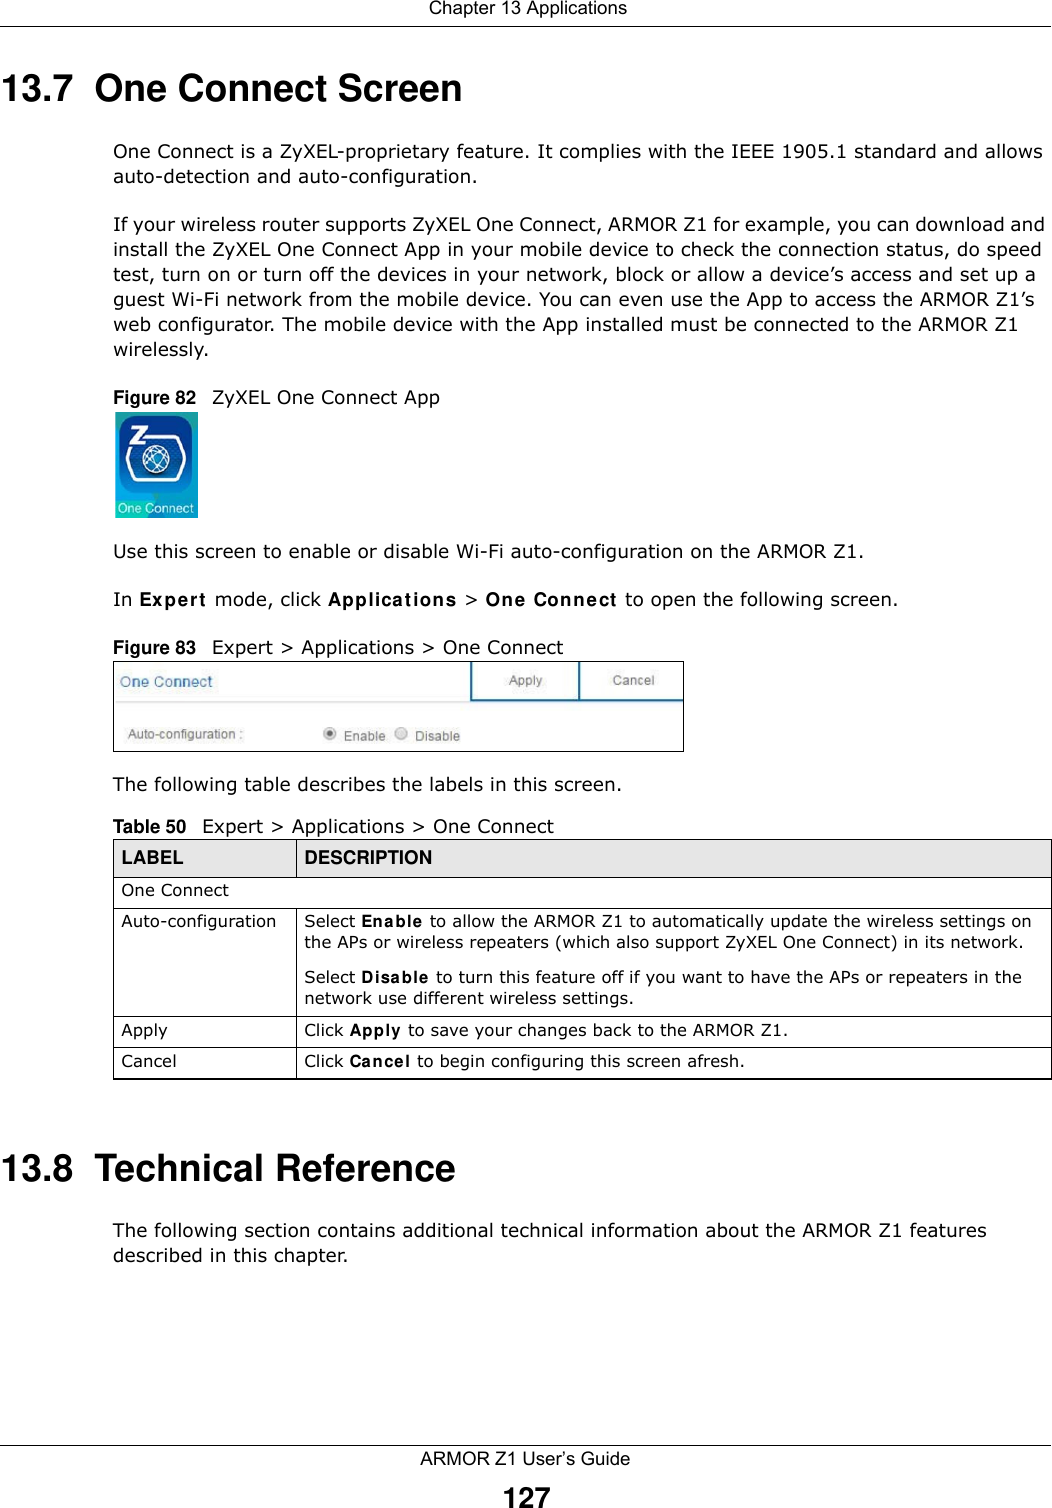  Chapter 13 ApplicationsARMOR Z1 User’s Guide12713.7  One Connect ScreenOne Connect is a ZyXEL-proprietary feature. It complies with the IEEE 1905.1 standard and allows auto-detection and auto-configuration.If your wireless router supports ZyXEL One Connect, ARMOR Z1 for example, you can download and install the ZyXEL One Connect App in your mobile device to check the connection status, do speed test, turn on or turn off the devices in your network, block or allow a device’s access and set up a guest Wi-Fi network from the mobile device. You can even use the App to access the ARMOR Z1’s web configurator. The mobile device with the App installed must be connected to the ARMOR Z1 wirelessly.Figure 82   ZyXEL One Connect AppUse this screen to enable or disable Wi-Fi auto-configuration on the ARMOR Z1. In Expert mode, click Applications &gt; One Connect to open the following screen.Figure 83   Expert &gt; Applications &gt; One Connect  The following table describes the labels in this screen.13.8  Technical ReferenceThe following section contains additional technical information about the ARMOR Z1 features described in this chapter.Table 50   Expert &gt; Applications &gt; One Connect LABEL DESCRIPTIONOne ConnectAuto-configuration Select Enable to allow the ARMOR Z1 to automatically update the wireless settings on the APs or wireless repeaters (which also support ZyXEL One Connect) in its network. Select Disable to turn this feature off if you want to have the APs or repeaters in the network use different wireless settings.Apply Click Apply to save your changes back to the ARMOR Z1.Cancel Click Cancel to begin configuring this screen afresh.